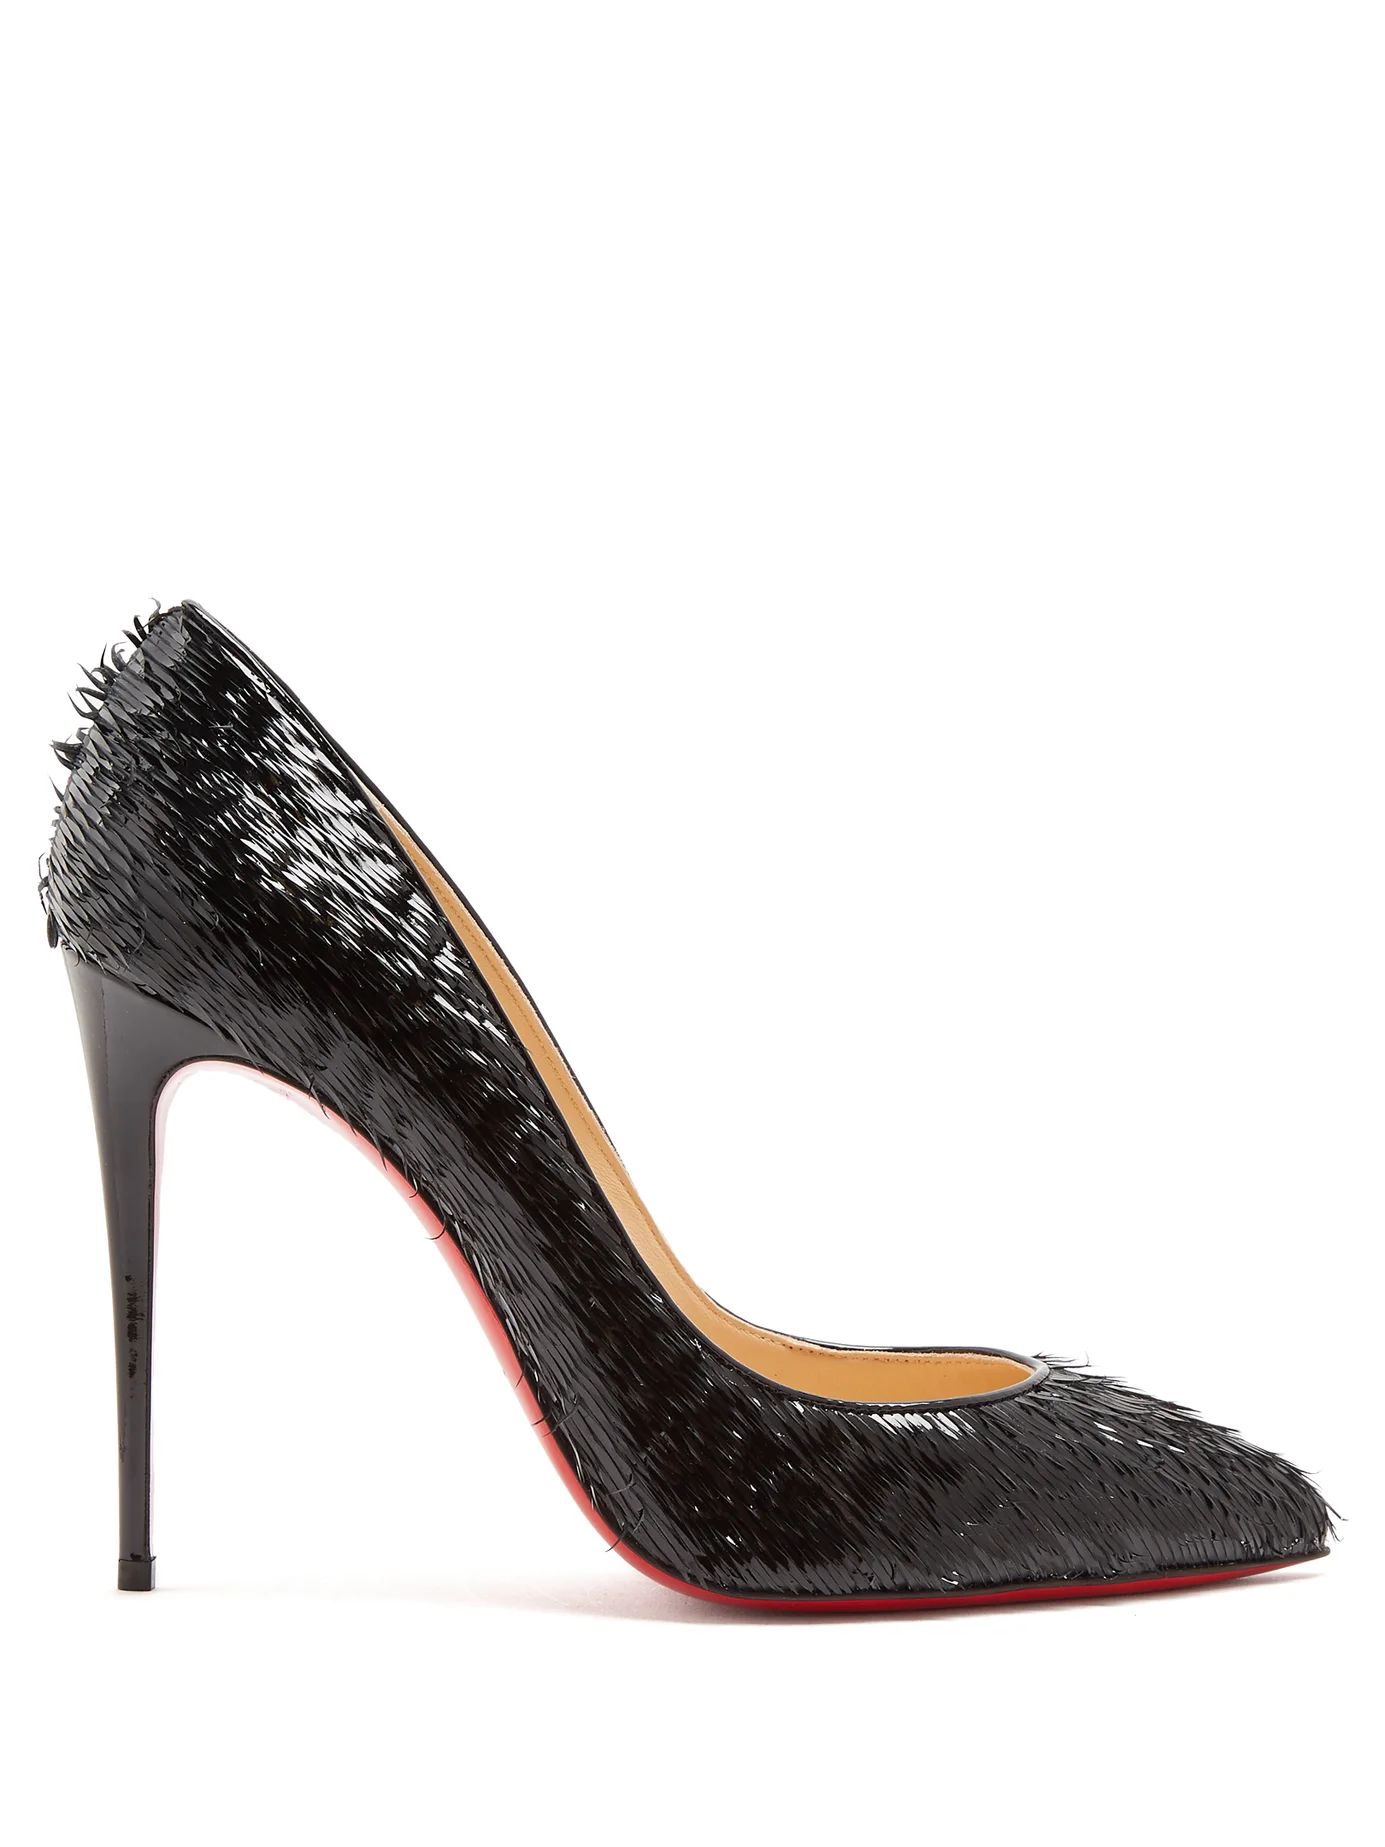 Pigalle Follies 100 patent-leather pumps | Matches (US)